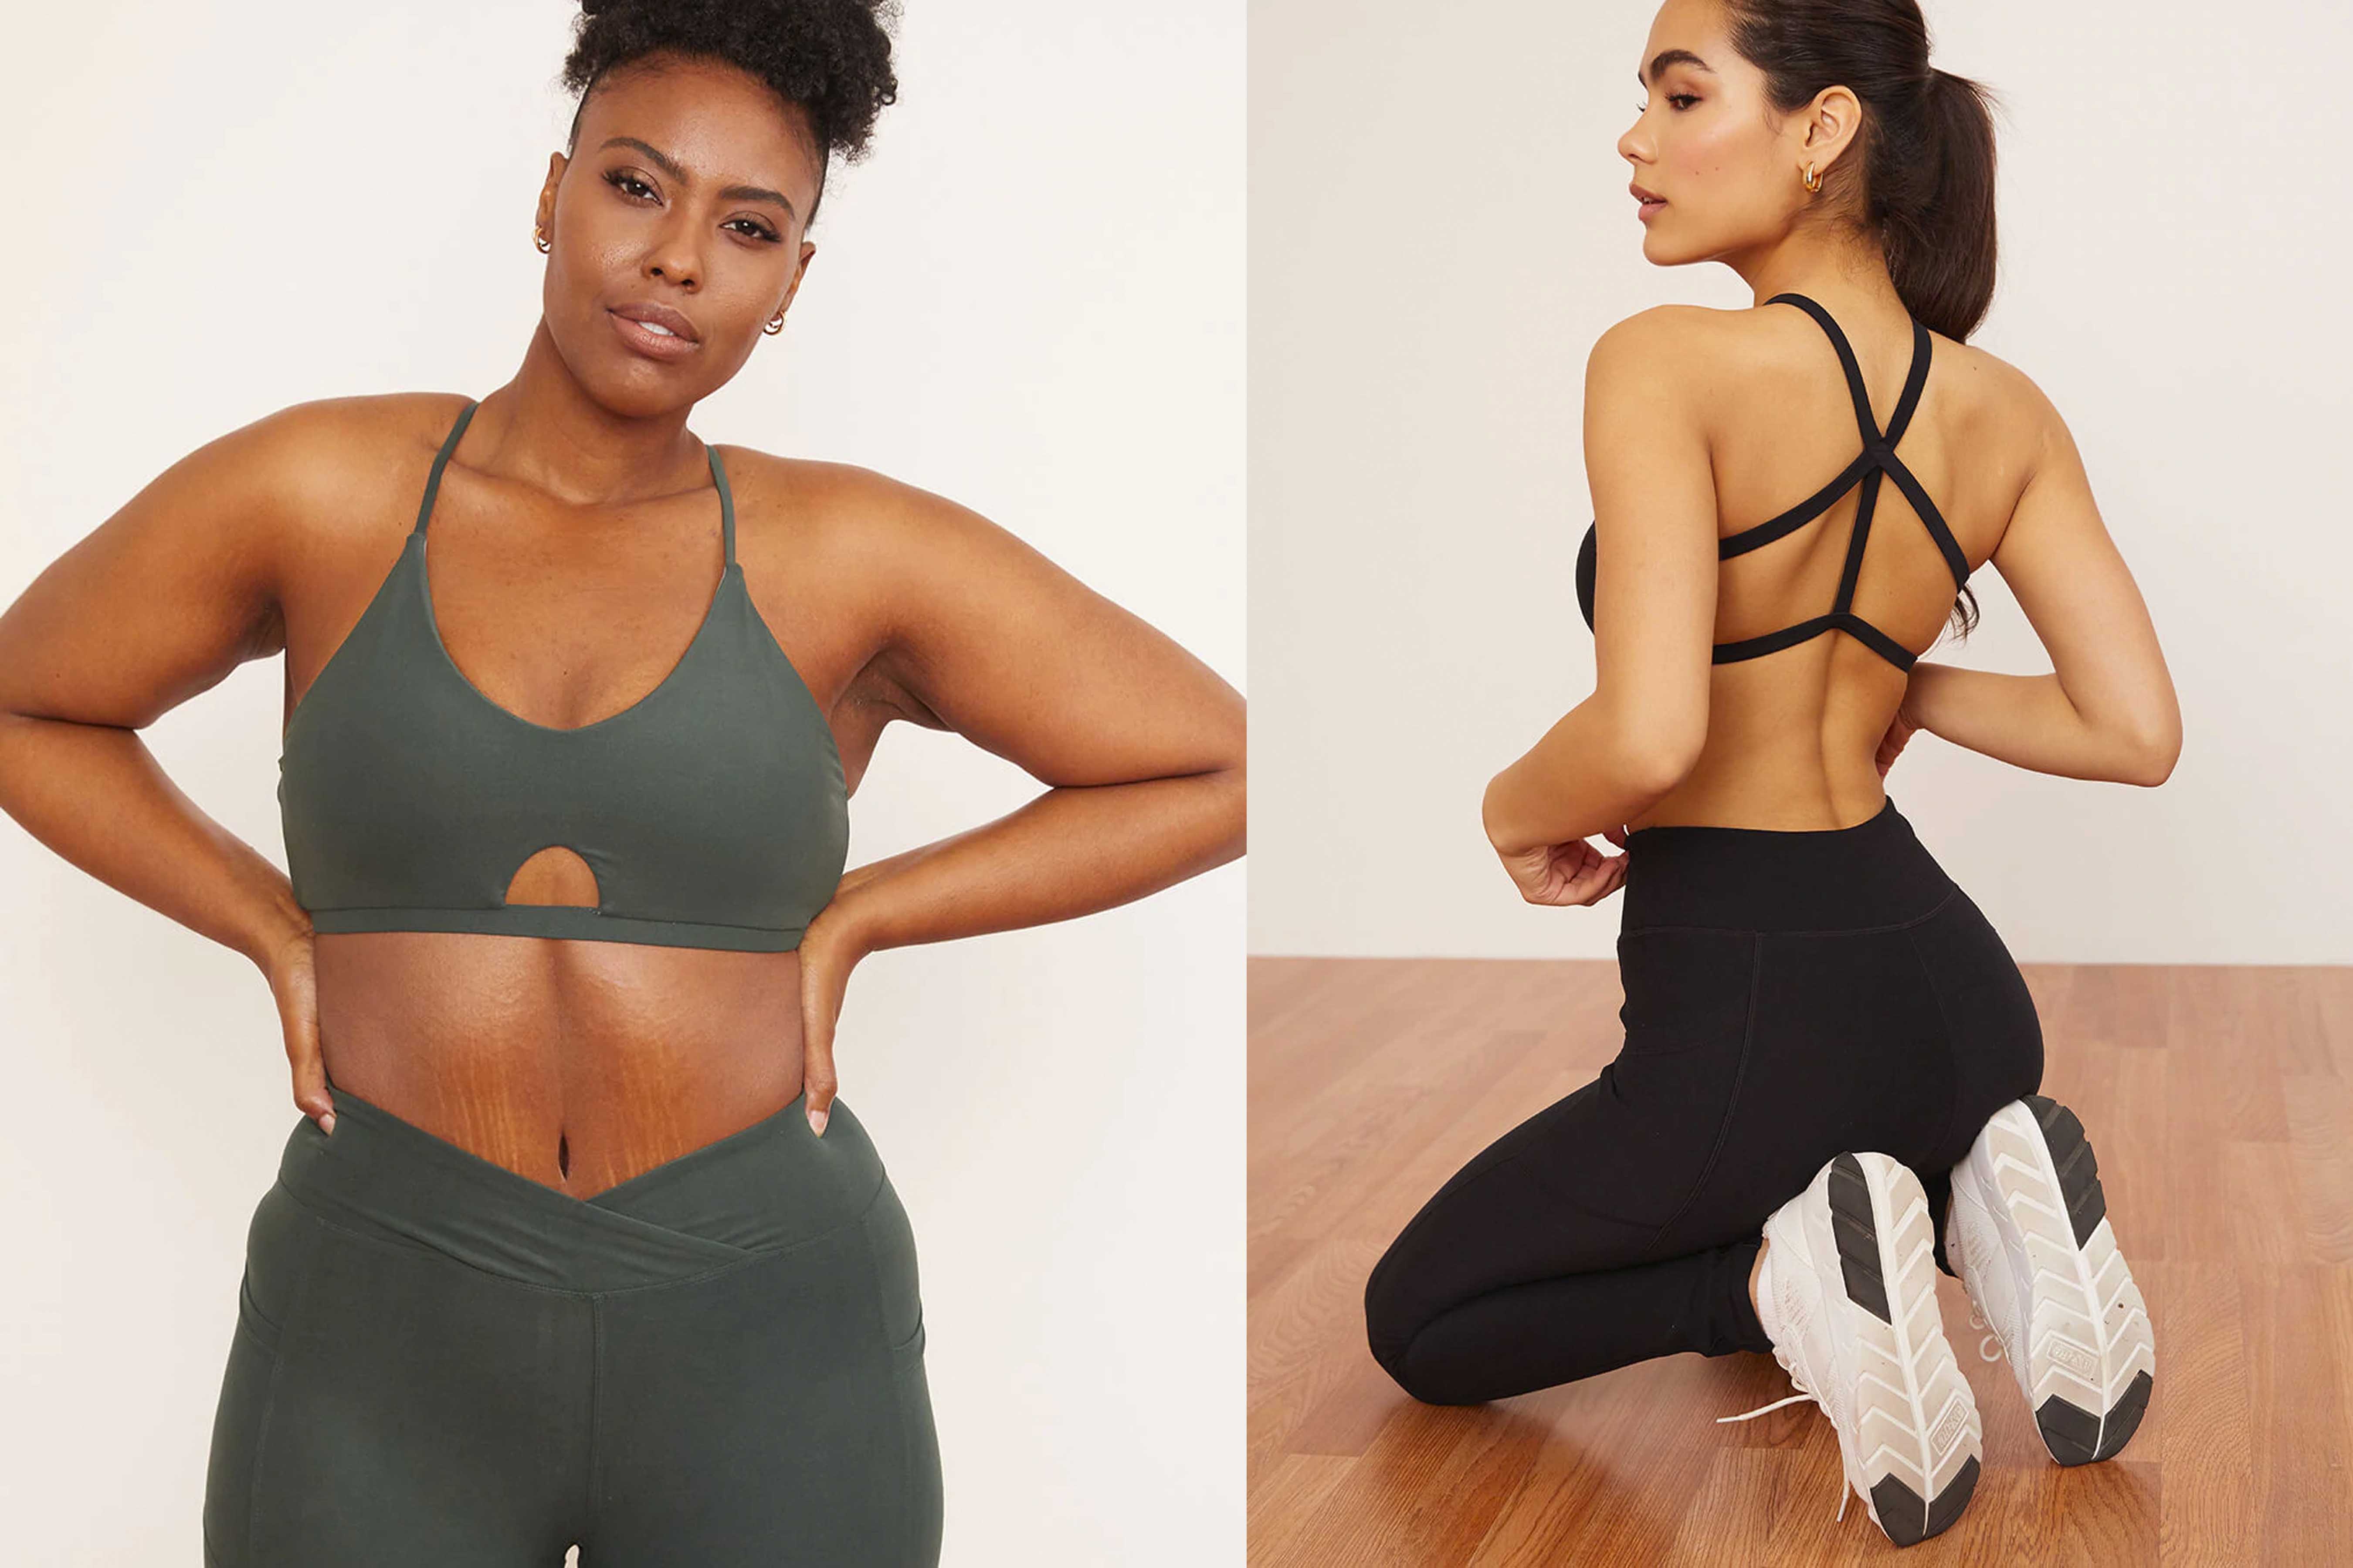 Wolven activewear brand